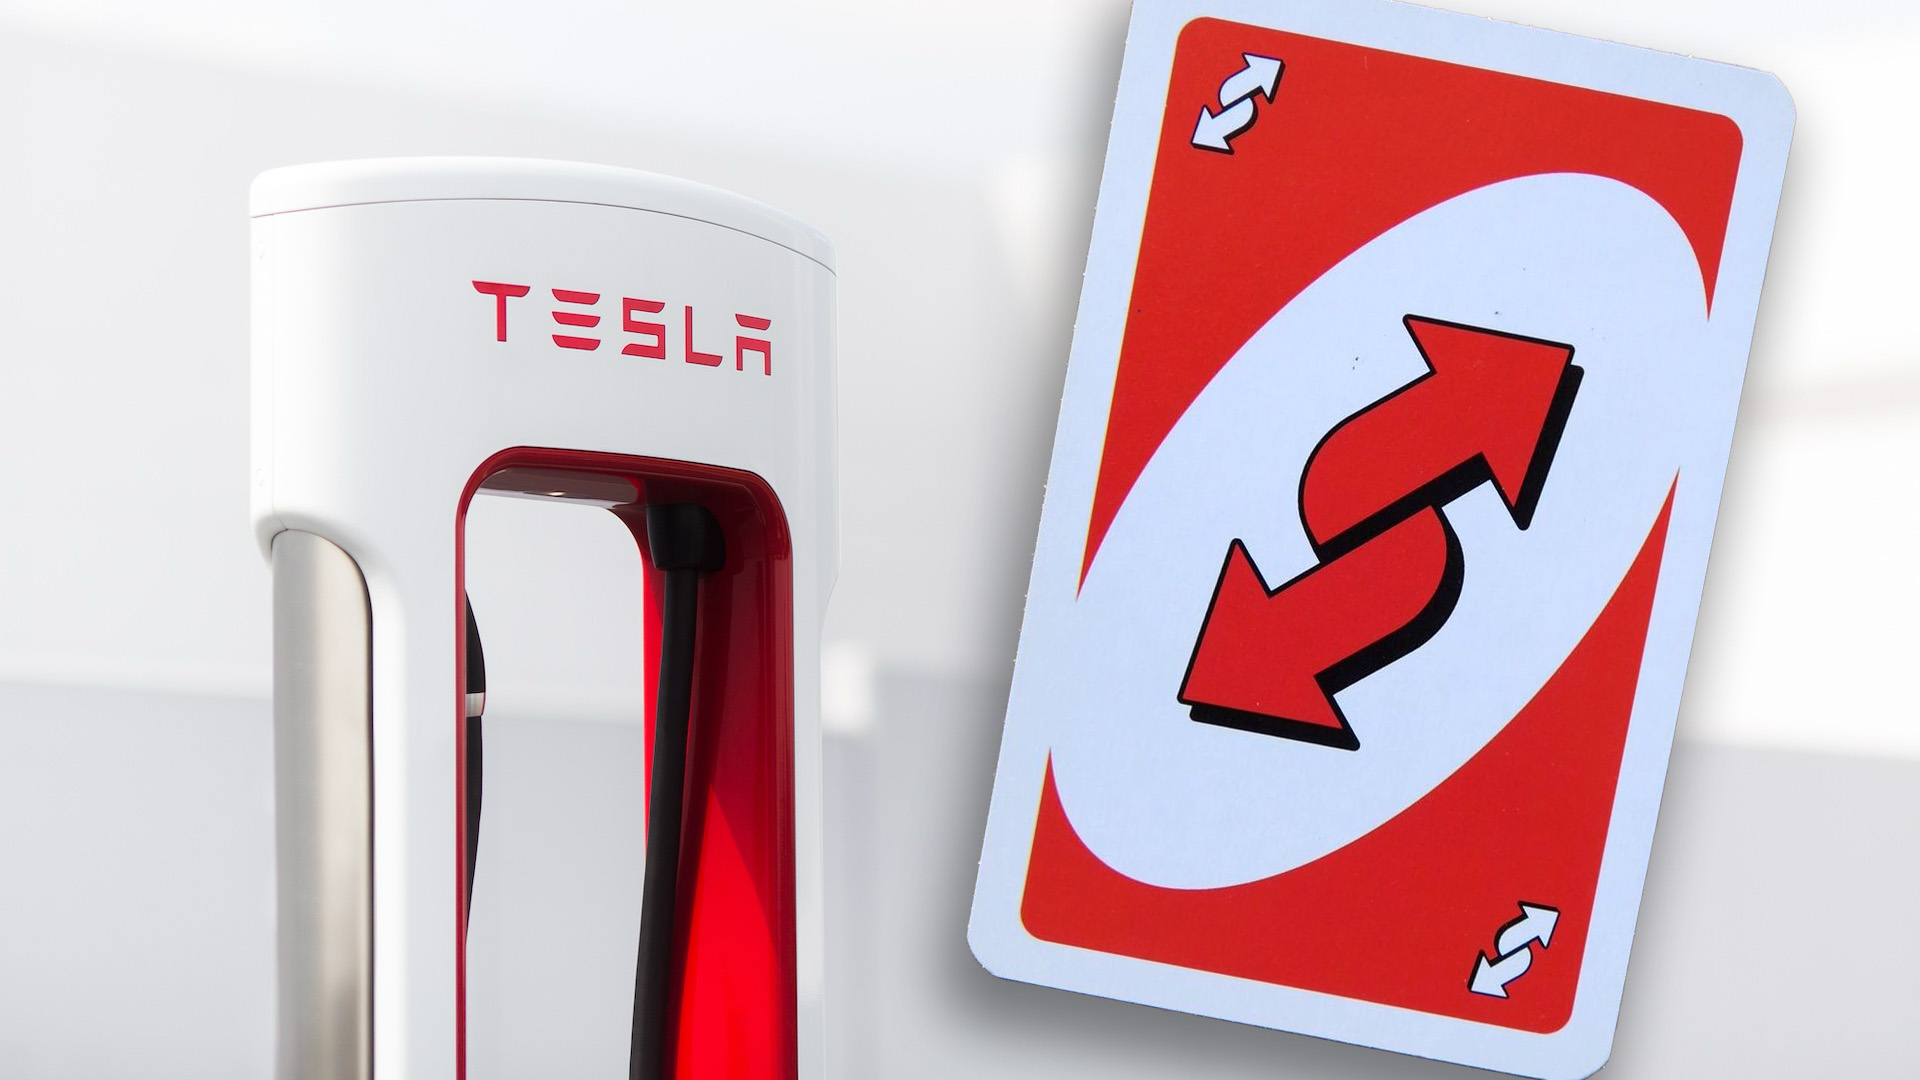 Tesla Supercharger stall with an Uno reverse card overlaid